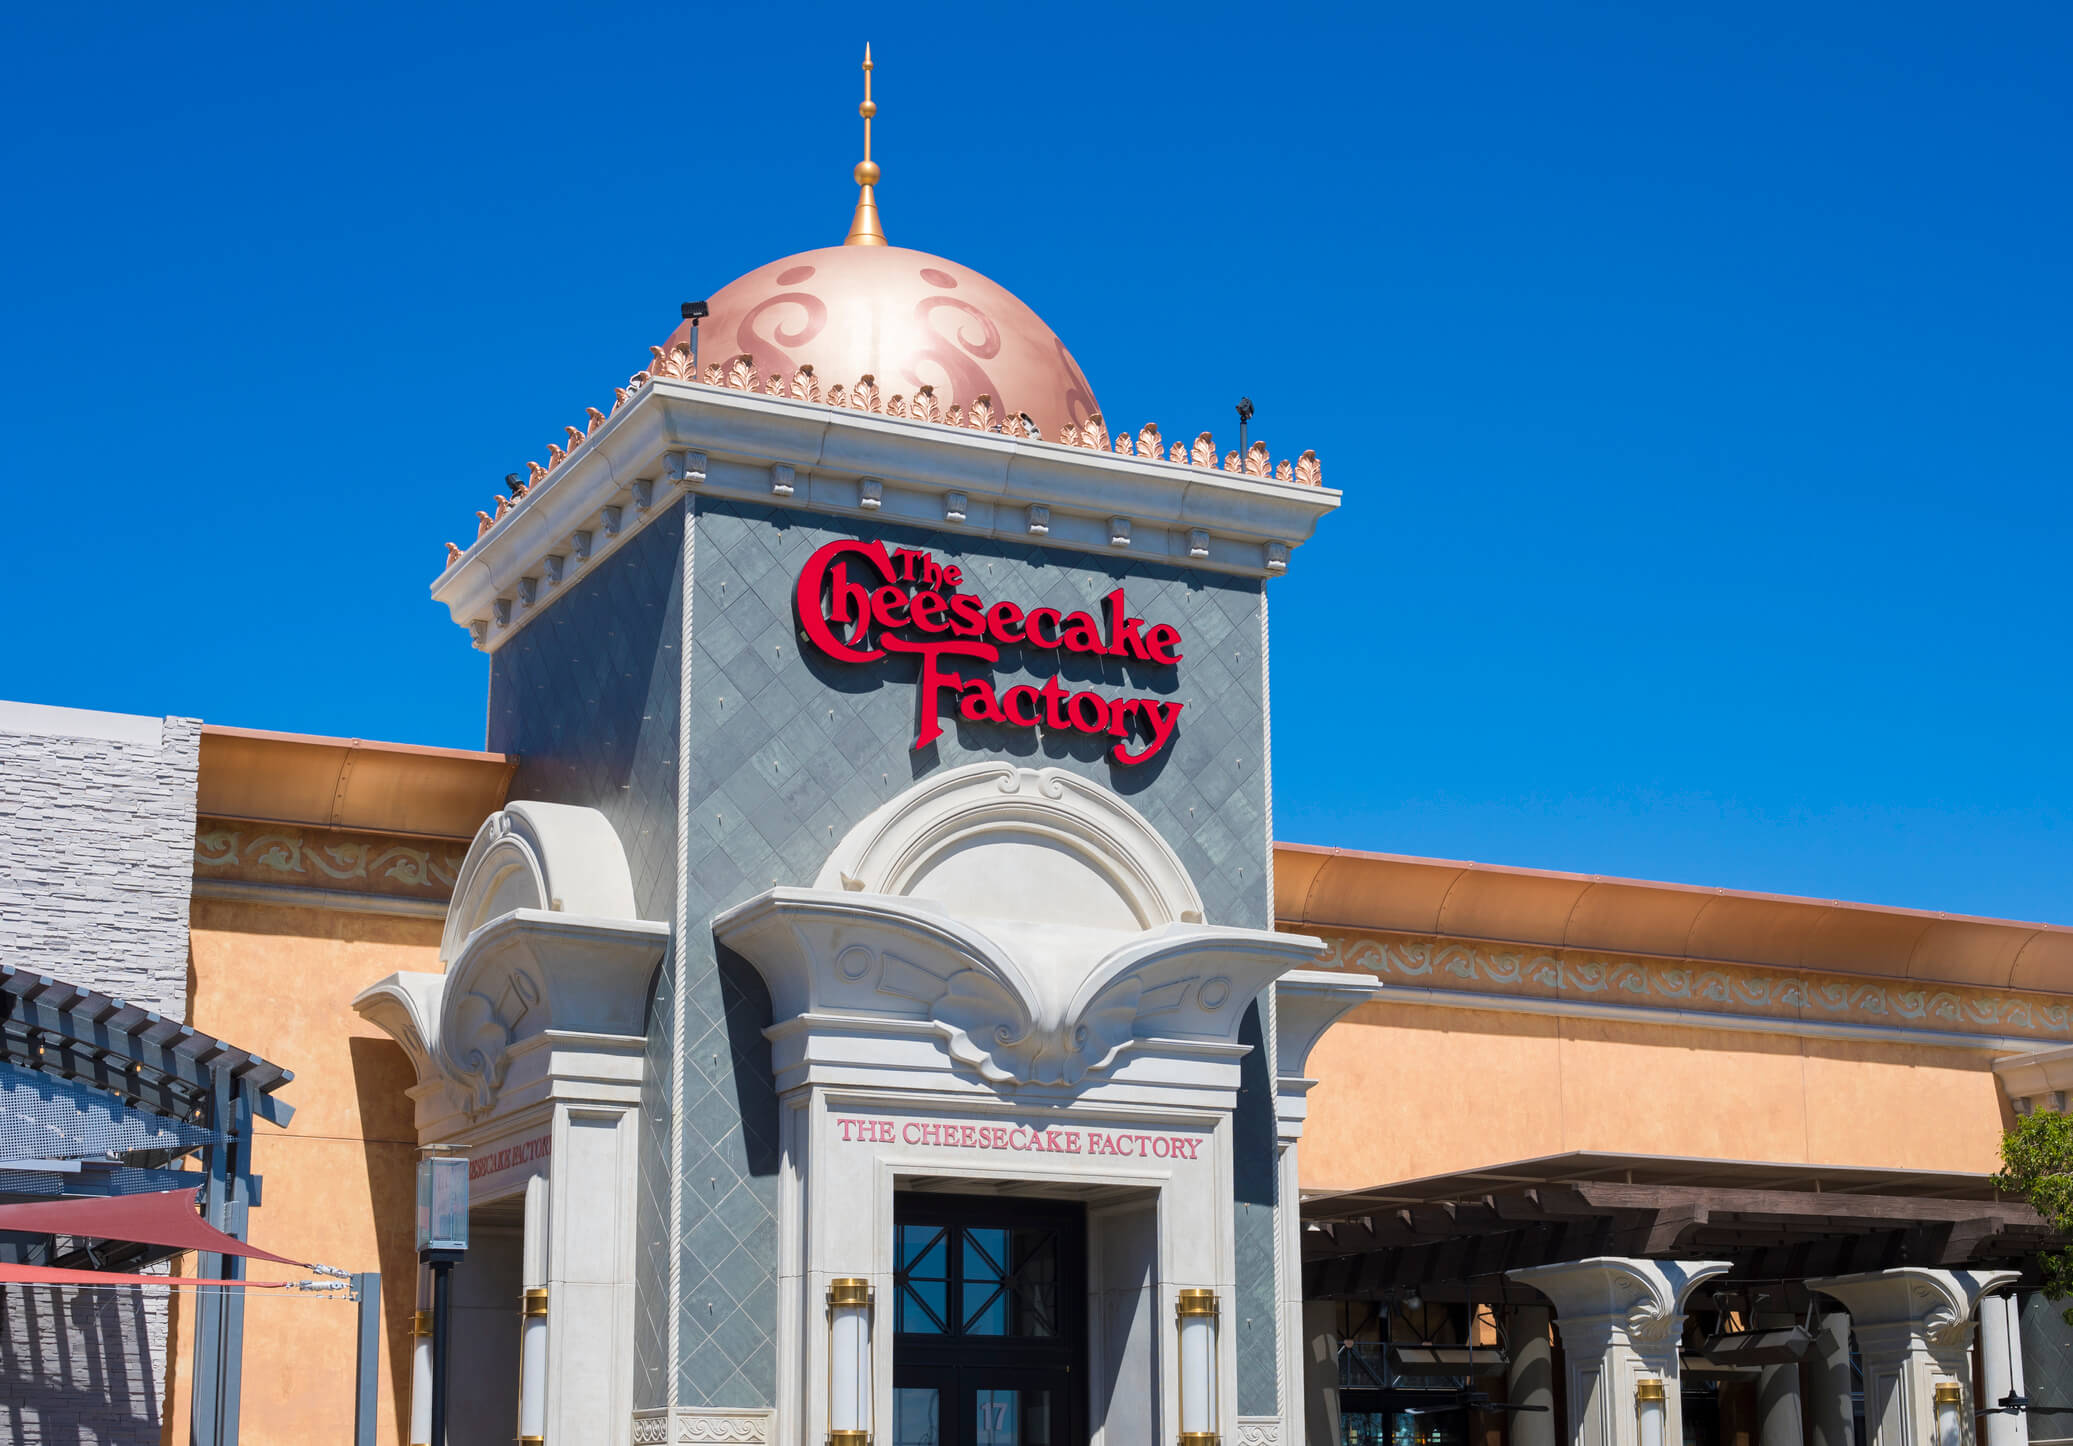 The Cheesecake Factory restaurant in Nevada